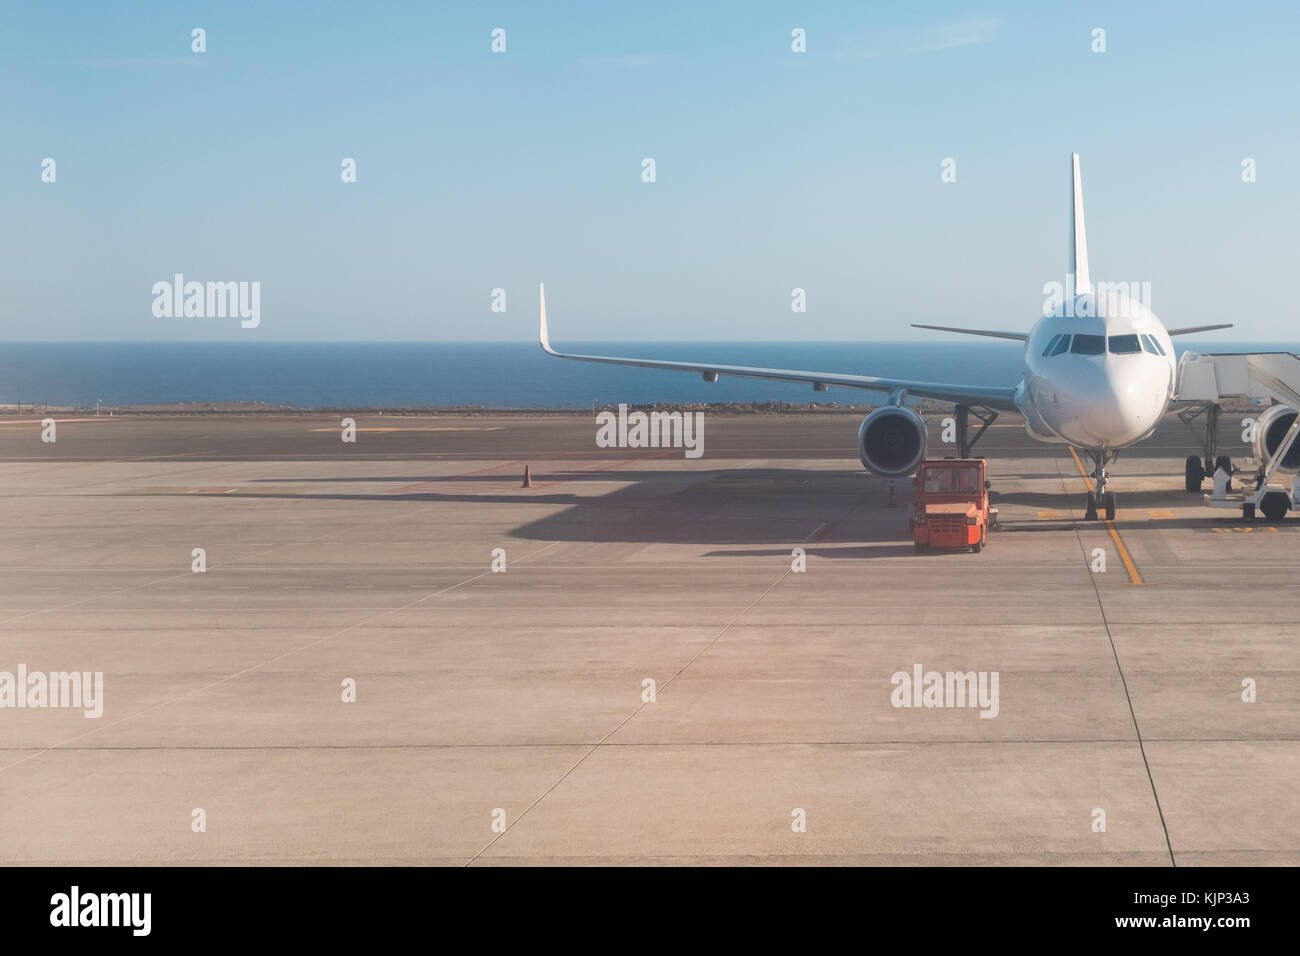 front of airplane standing on runway with ocean background Stock Photo